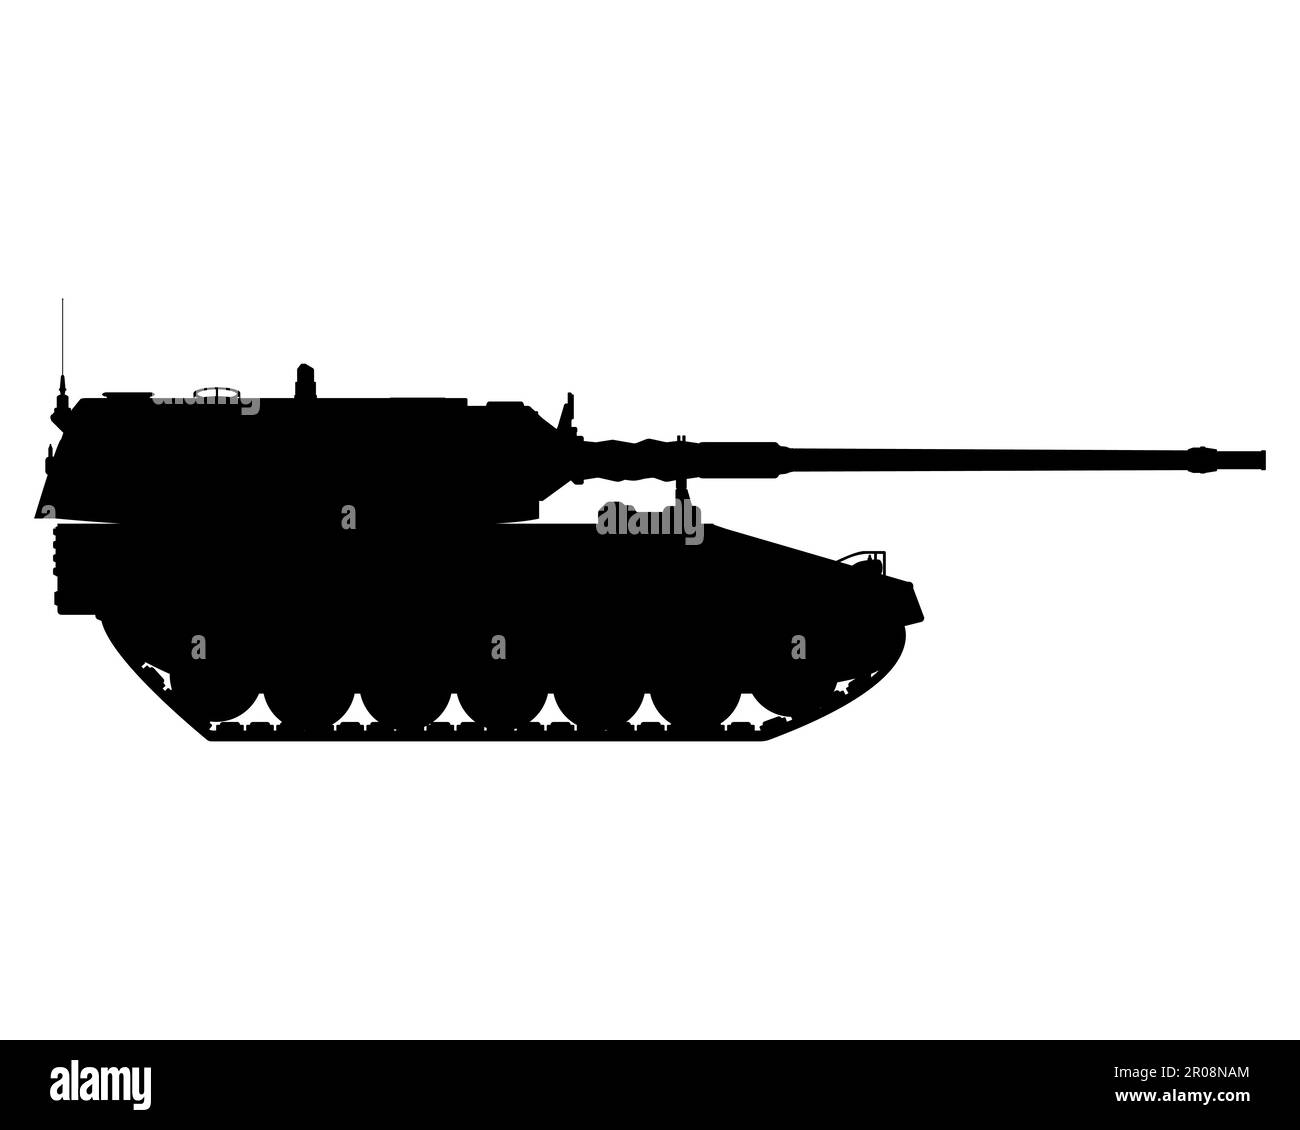 Self-propelled howitzer silhouette. German 155 mm Panzerhaubitze 2000. Military armored vehicle. Vector illustration isolated on white background. Stock Vector